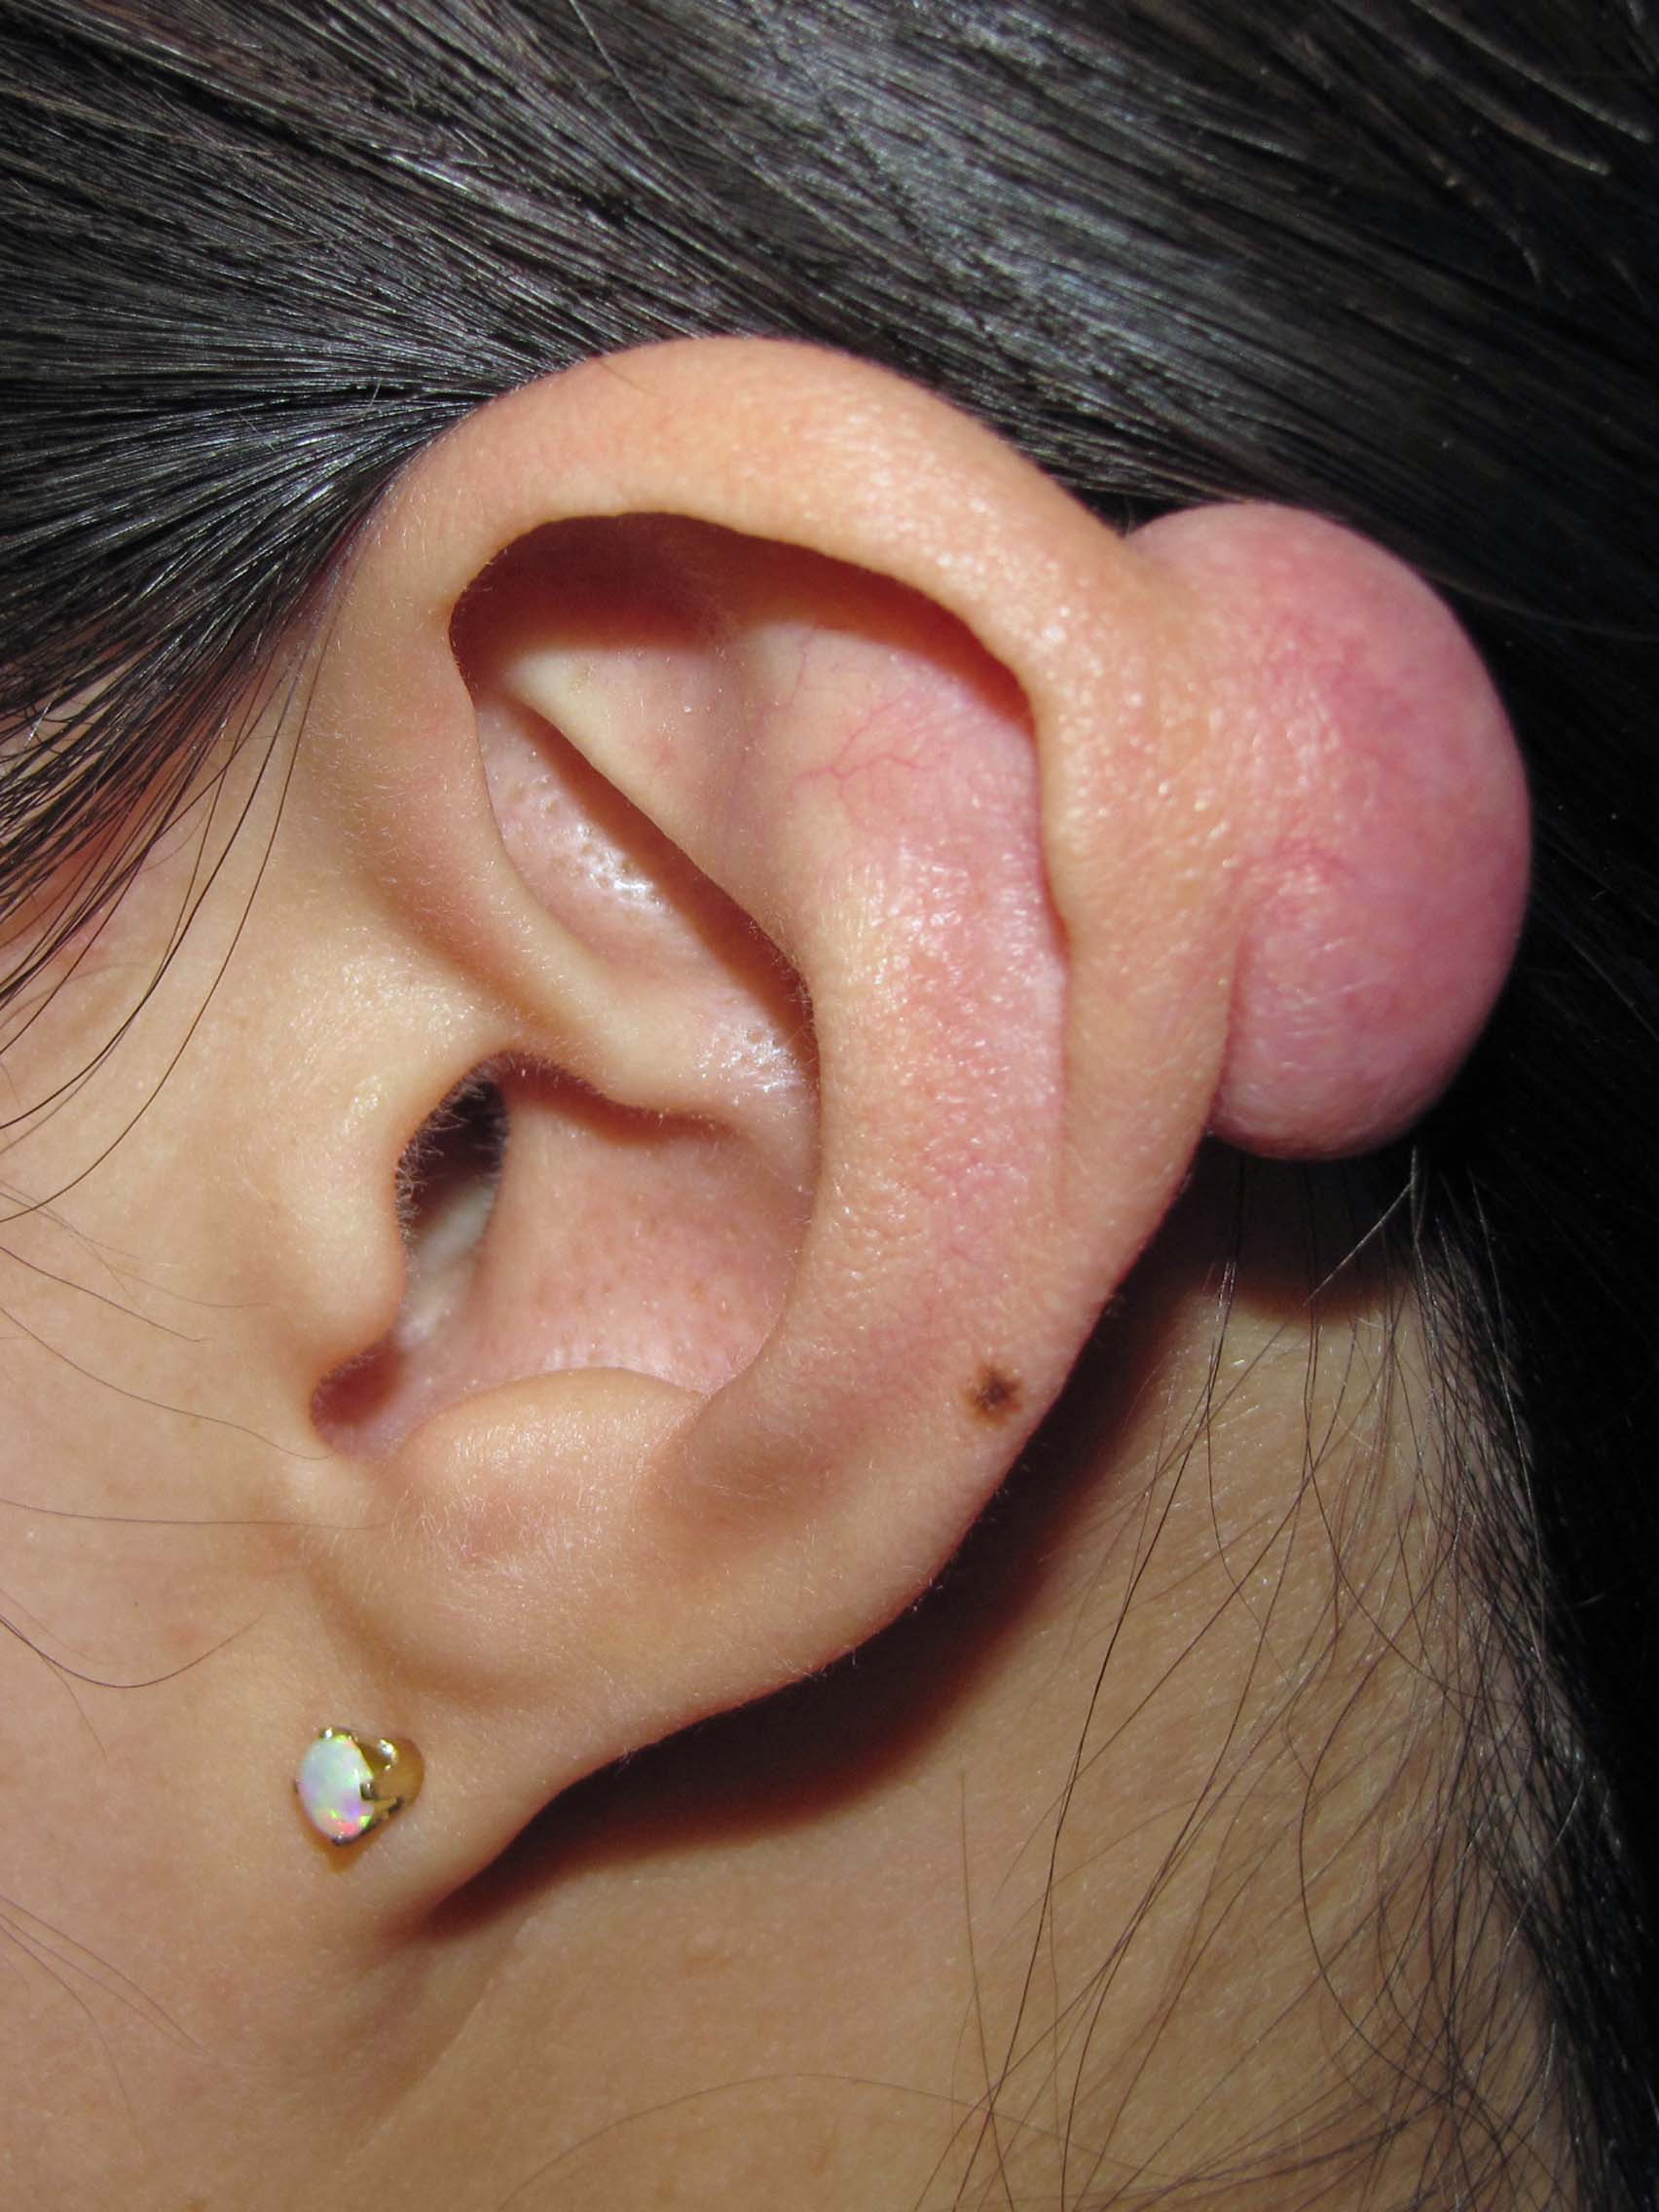 Infected auricular keloid secondary to attempted selfamputation of a gauge  earring  BMJ Case Reports